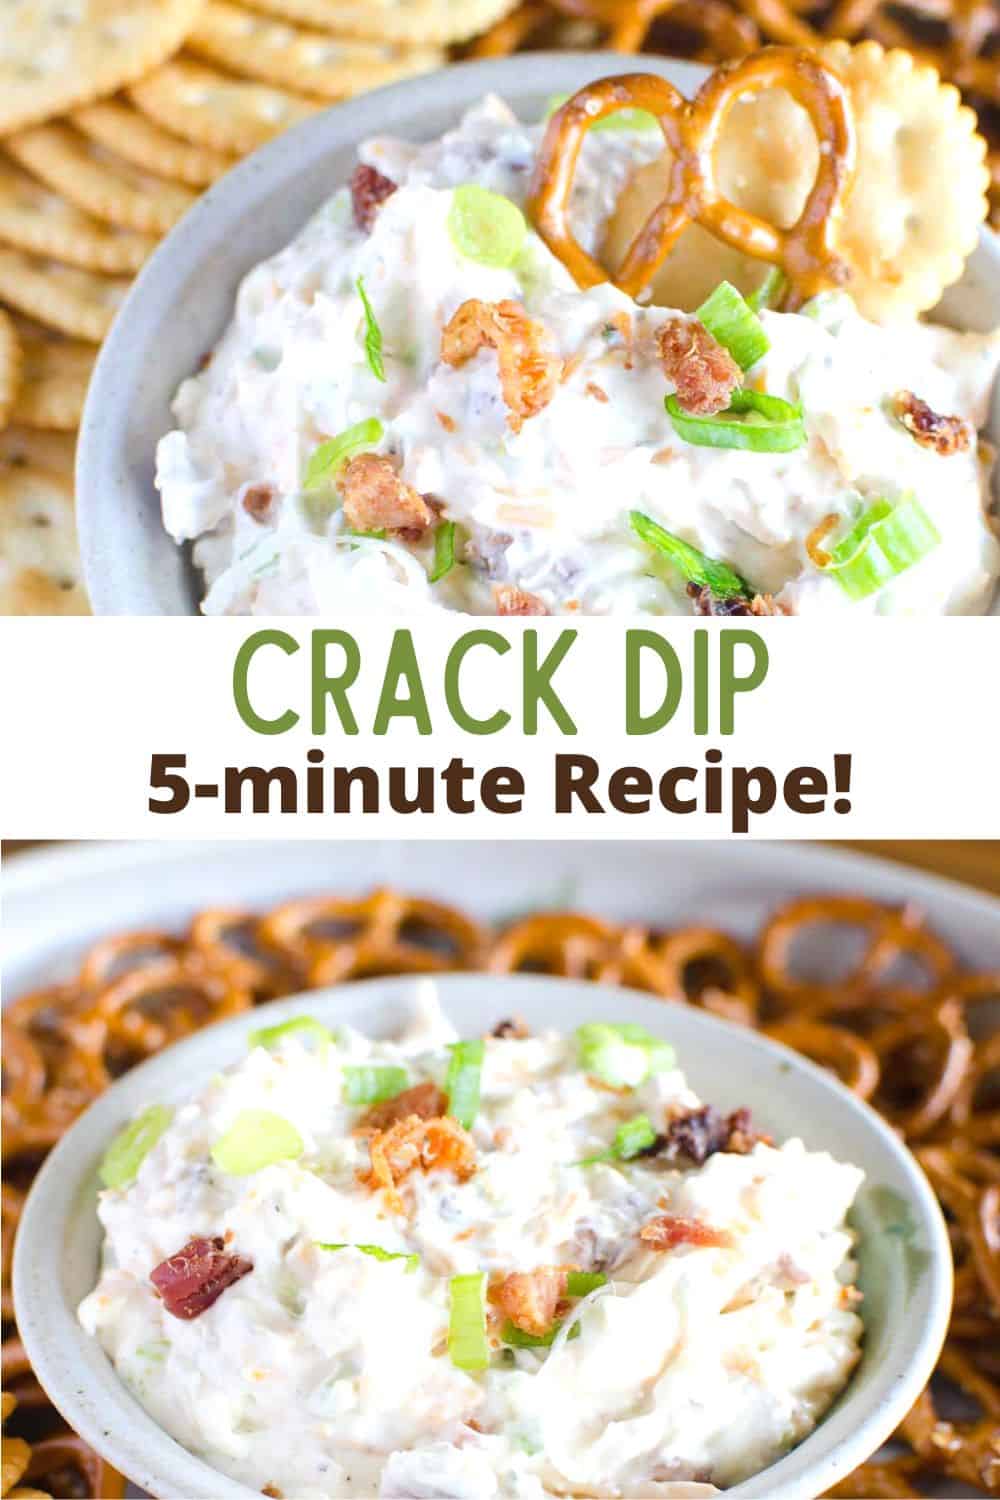 This pretzel dip recipe with cream cheese is super easy and full of flavor. Otherwise known as "crack dip", it's irresistible and comes together in under 5 minutes!